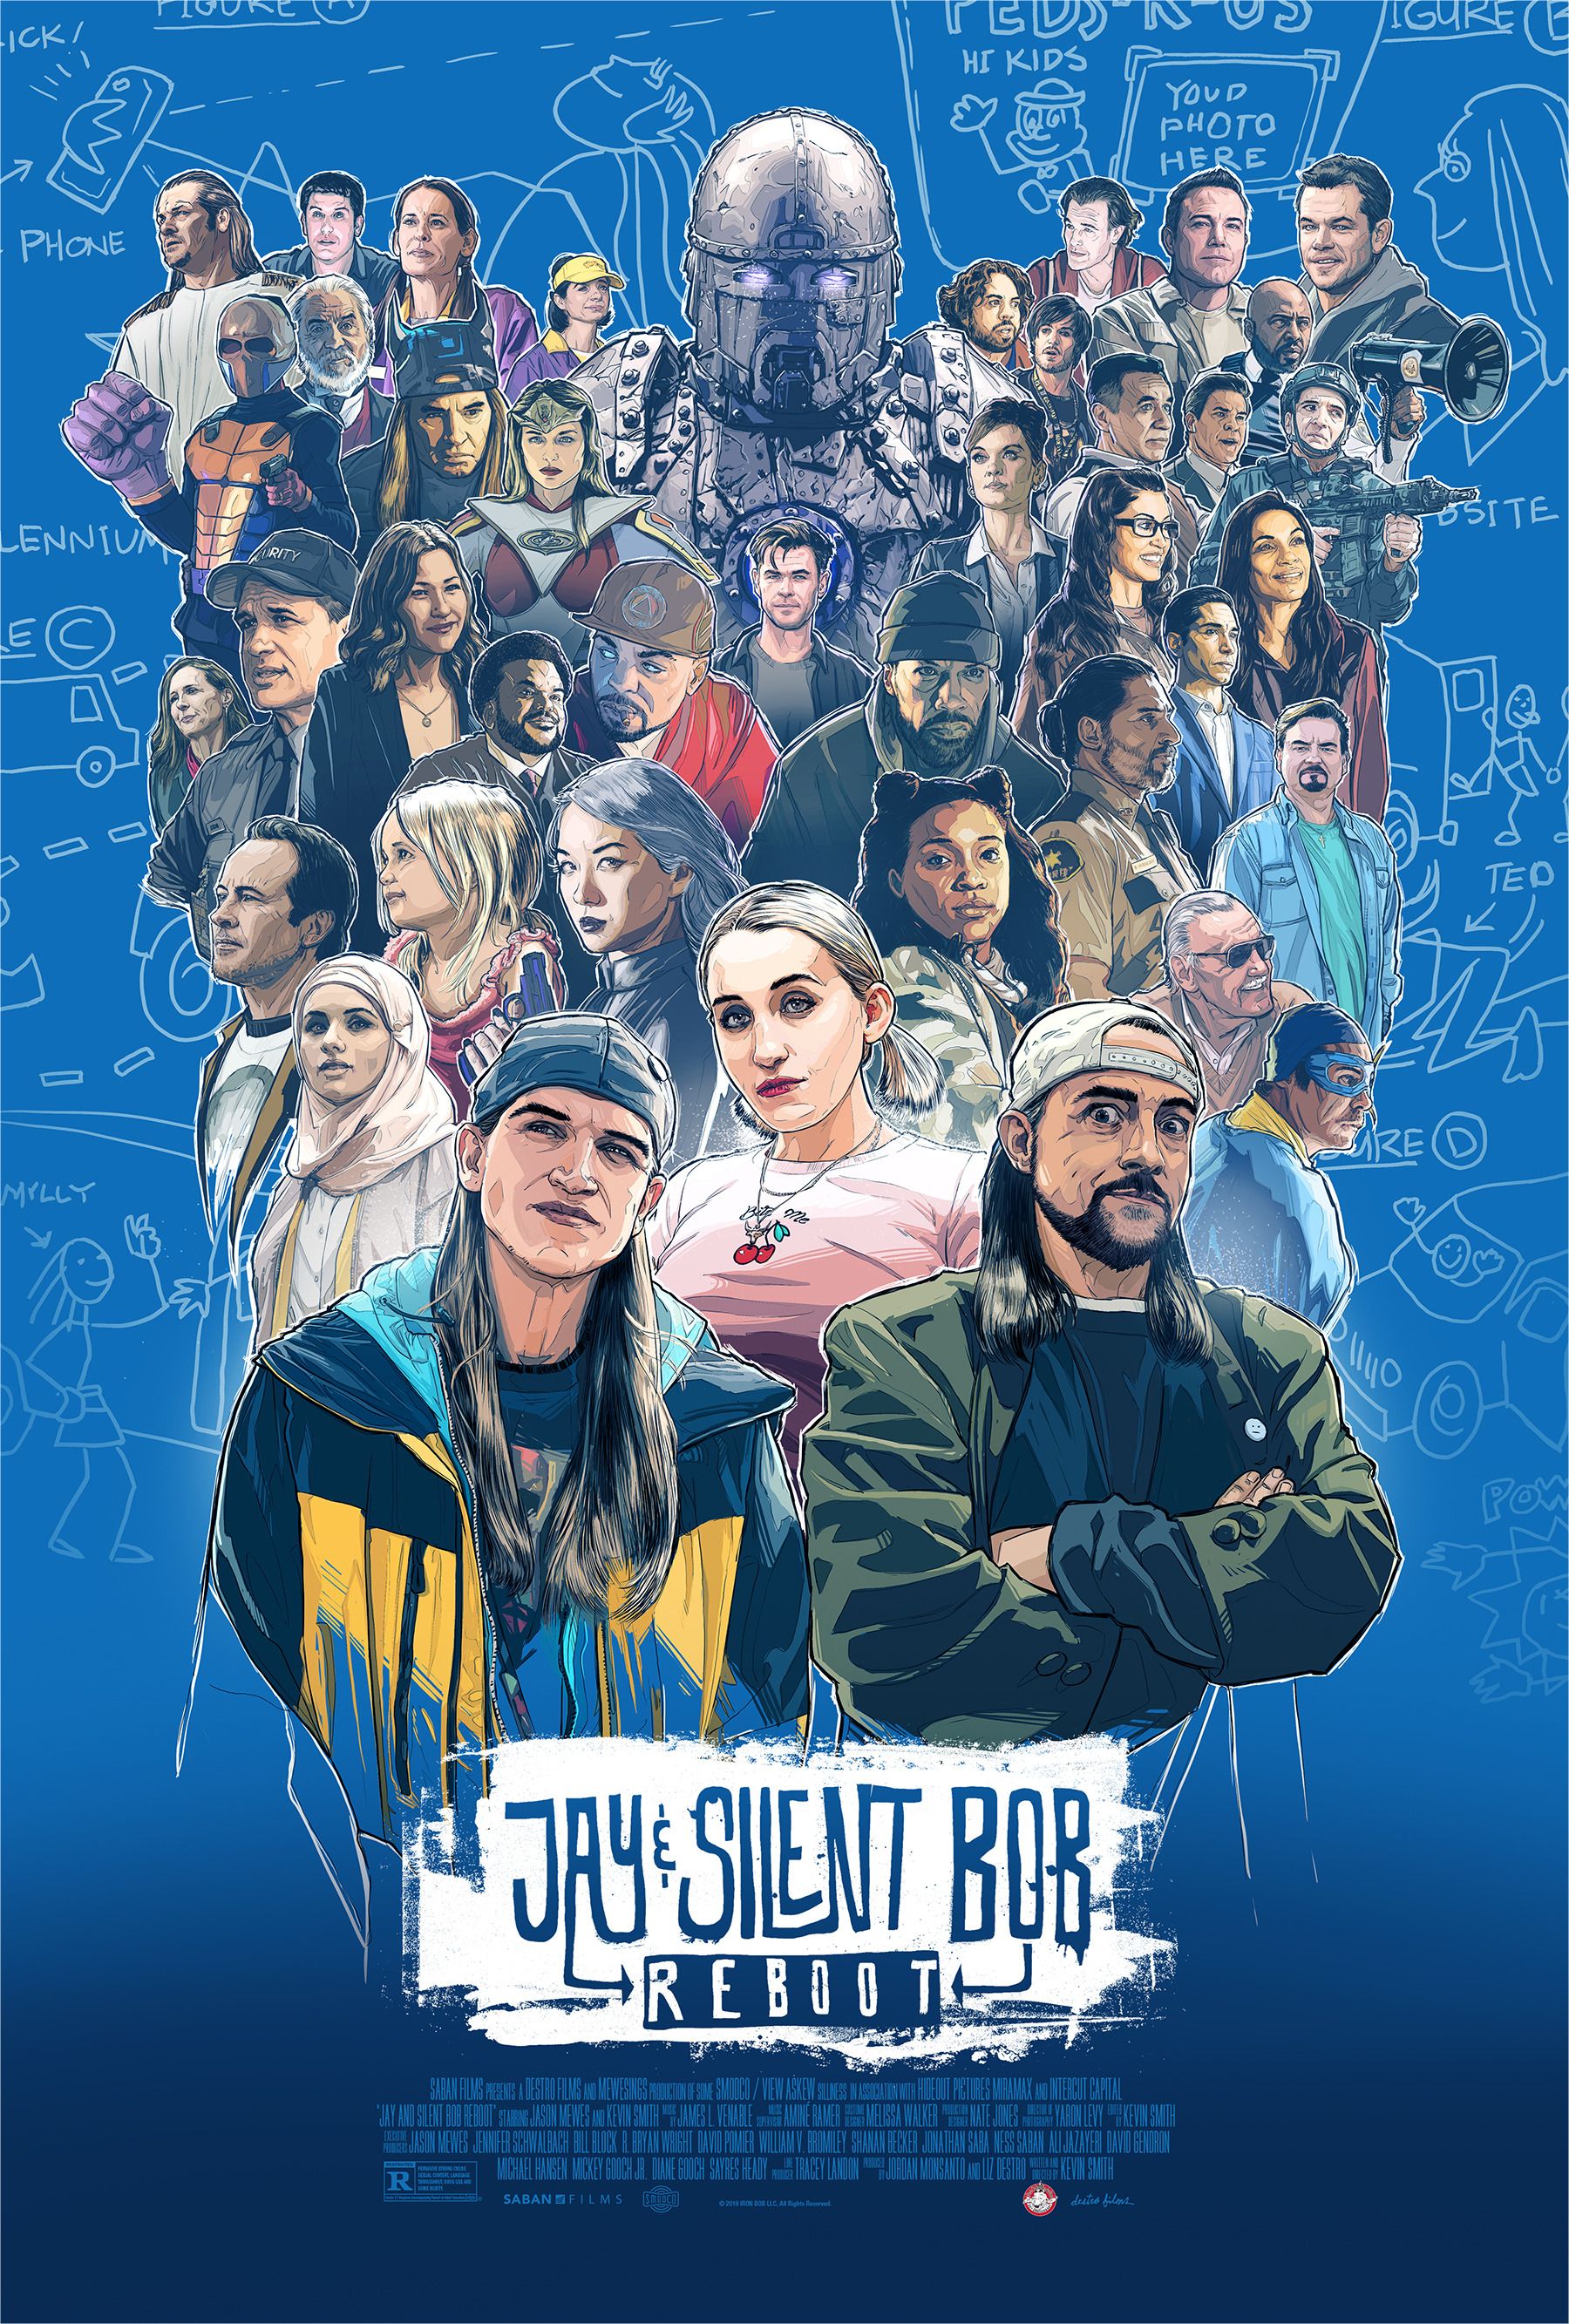 Jay and Silent Bob movie reboot poster